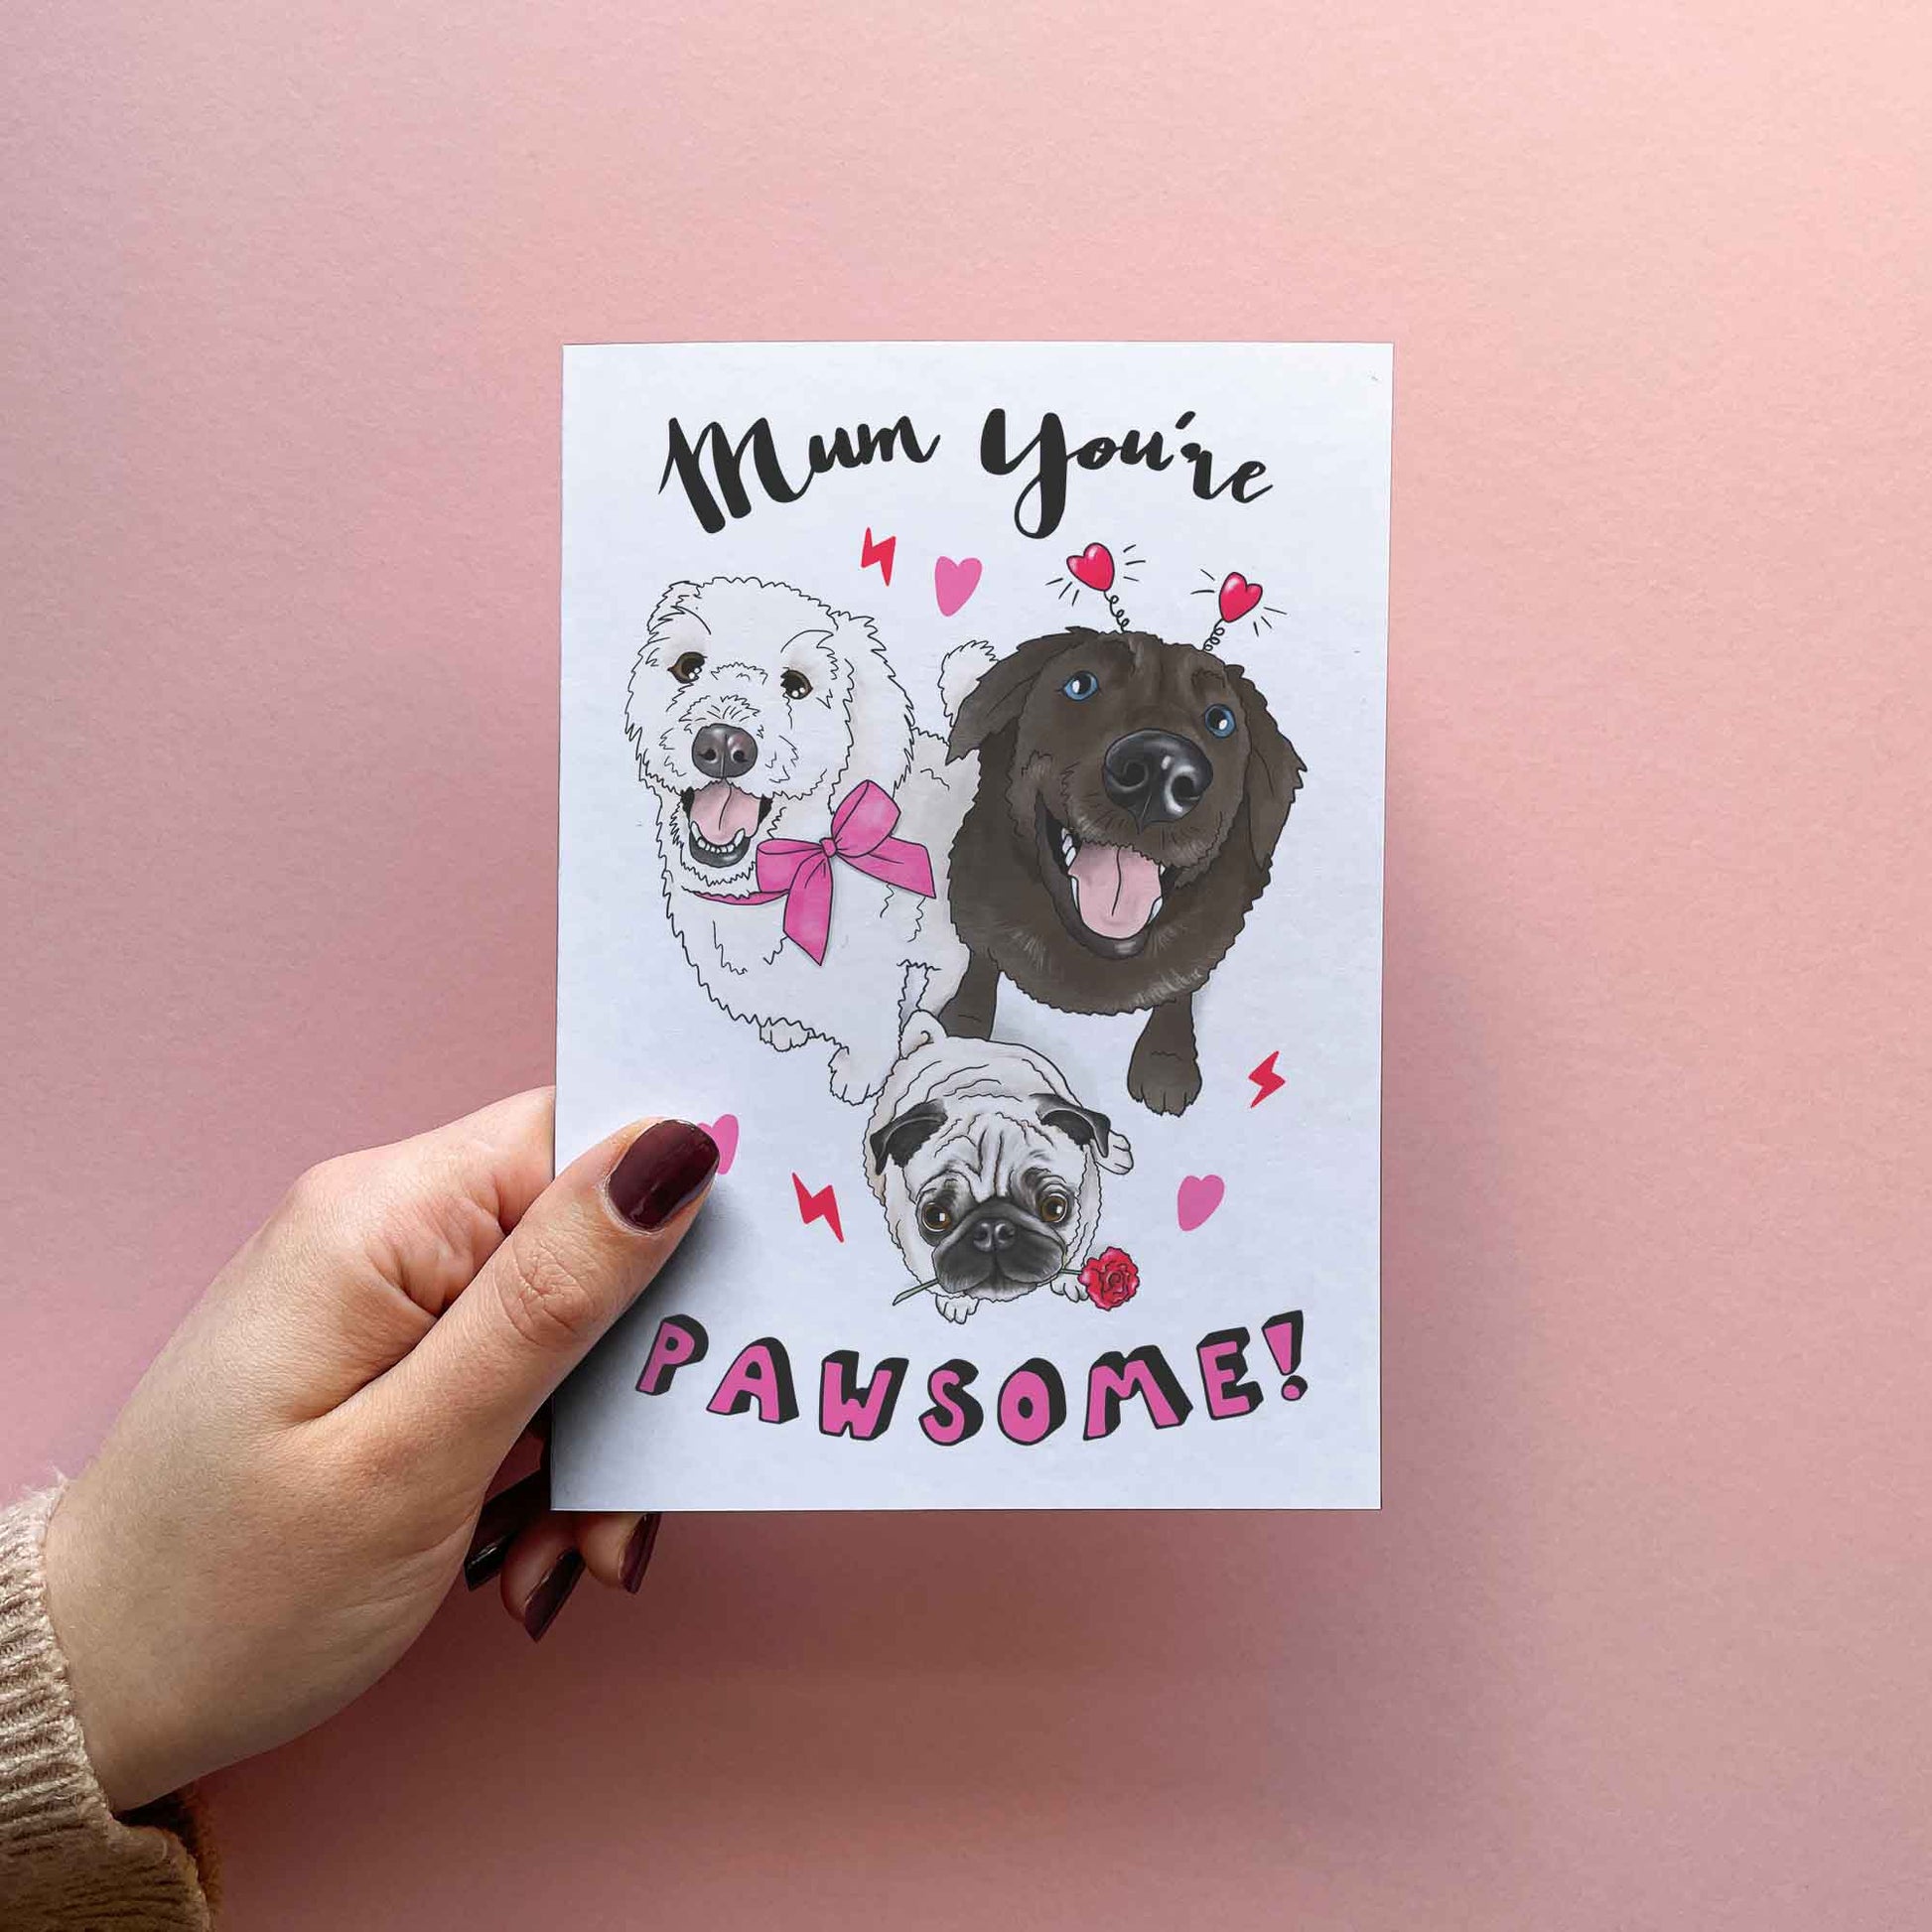 Funny mother's day card for dog mum. mother's day ideas for mom. Card Thea reads 'Mum you're pawsome!' with cute illustrations of a pug, a Labrador and a white fluffy dog.